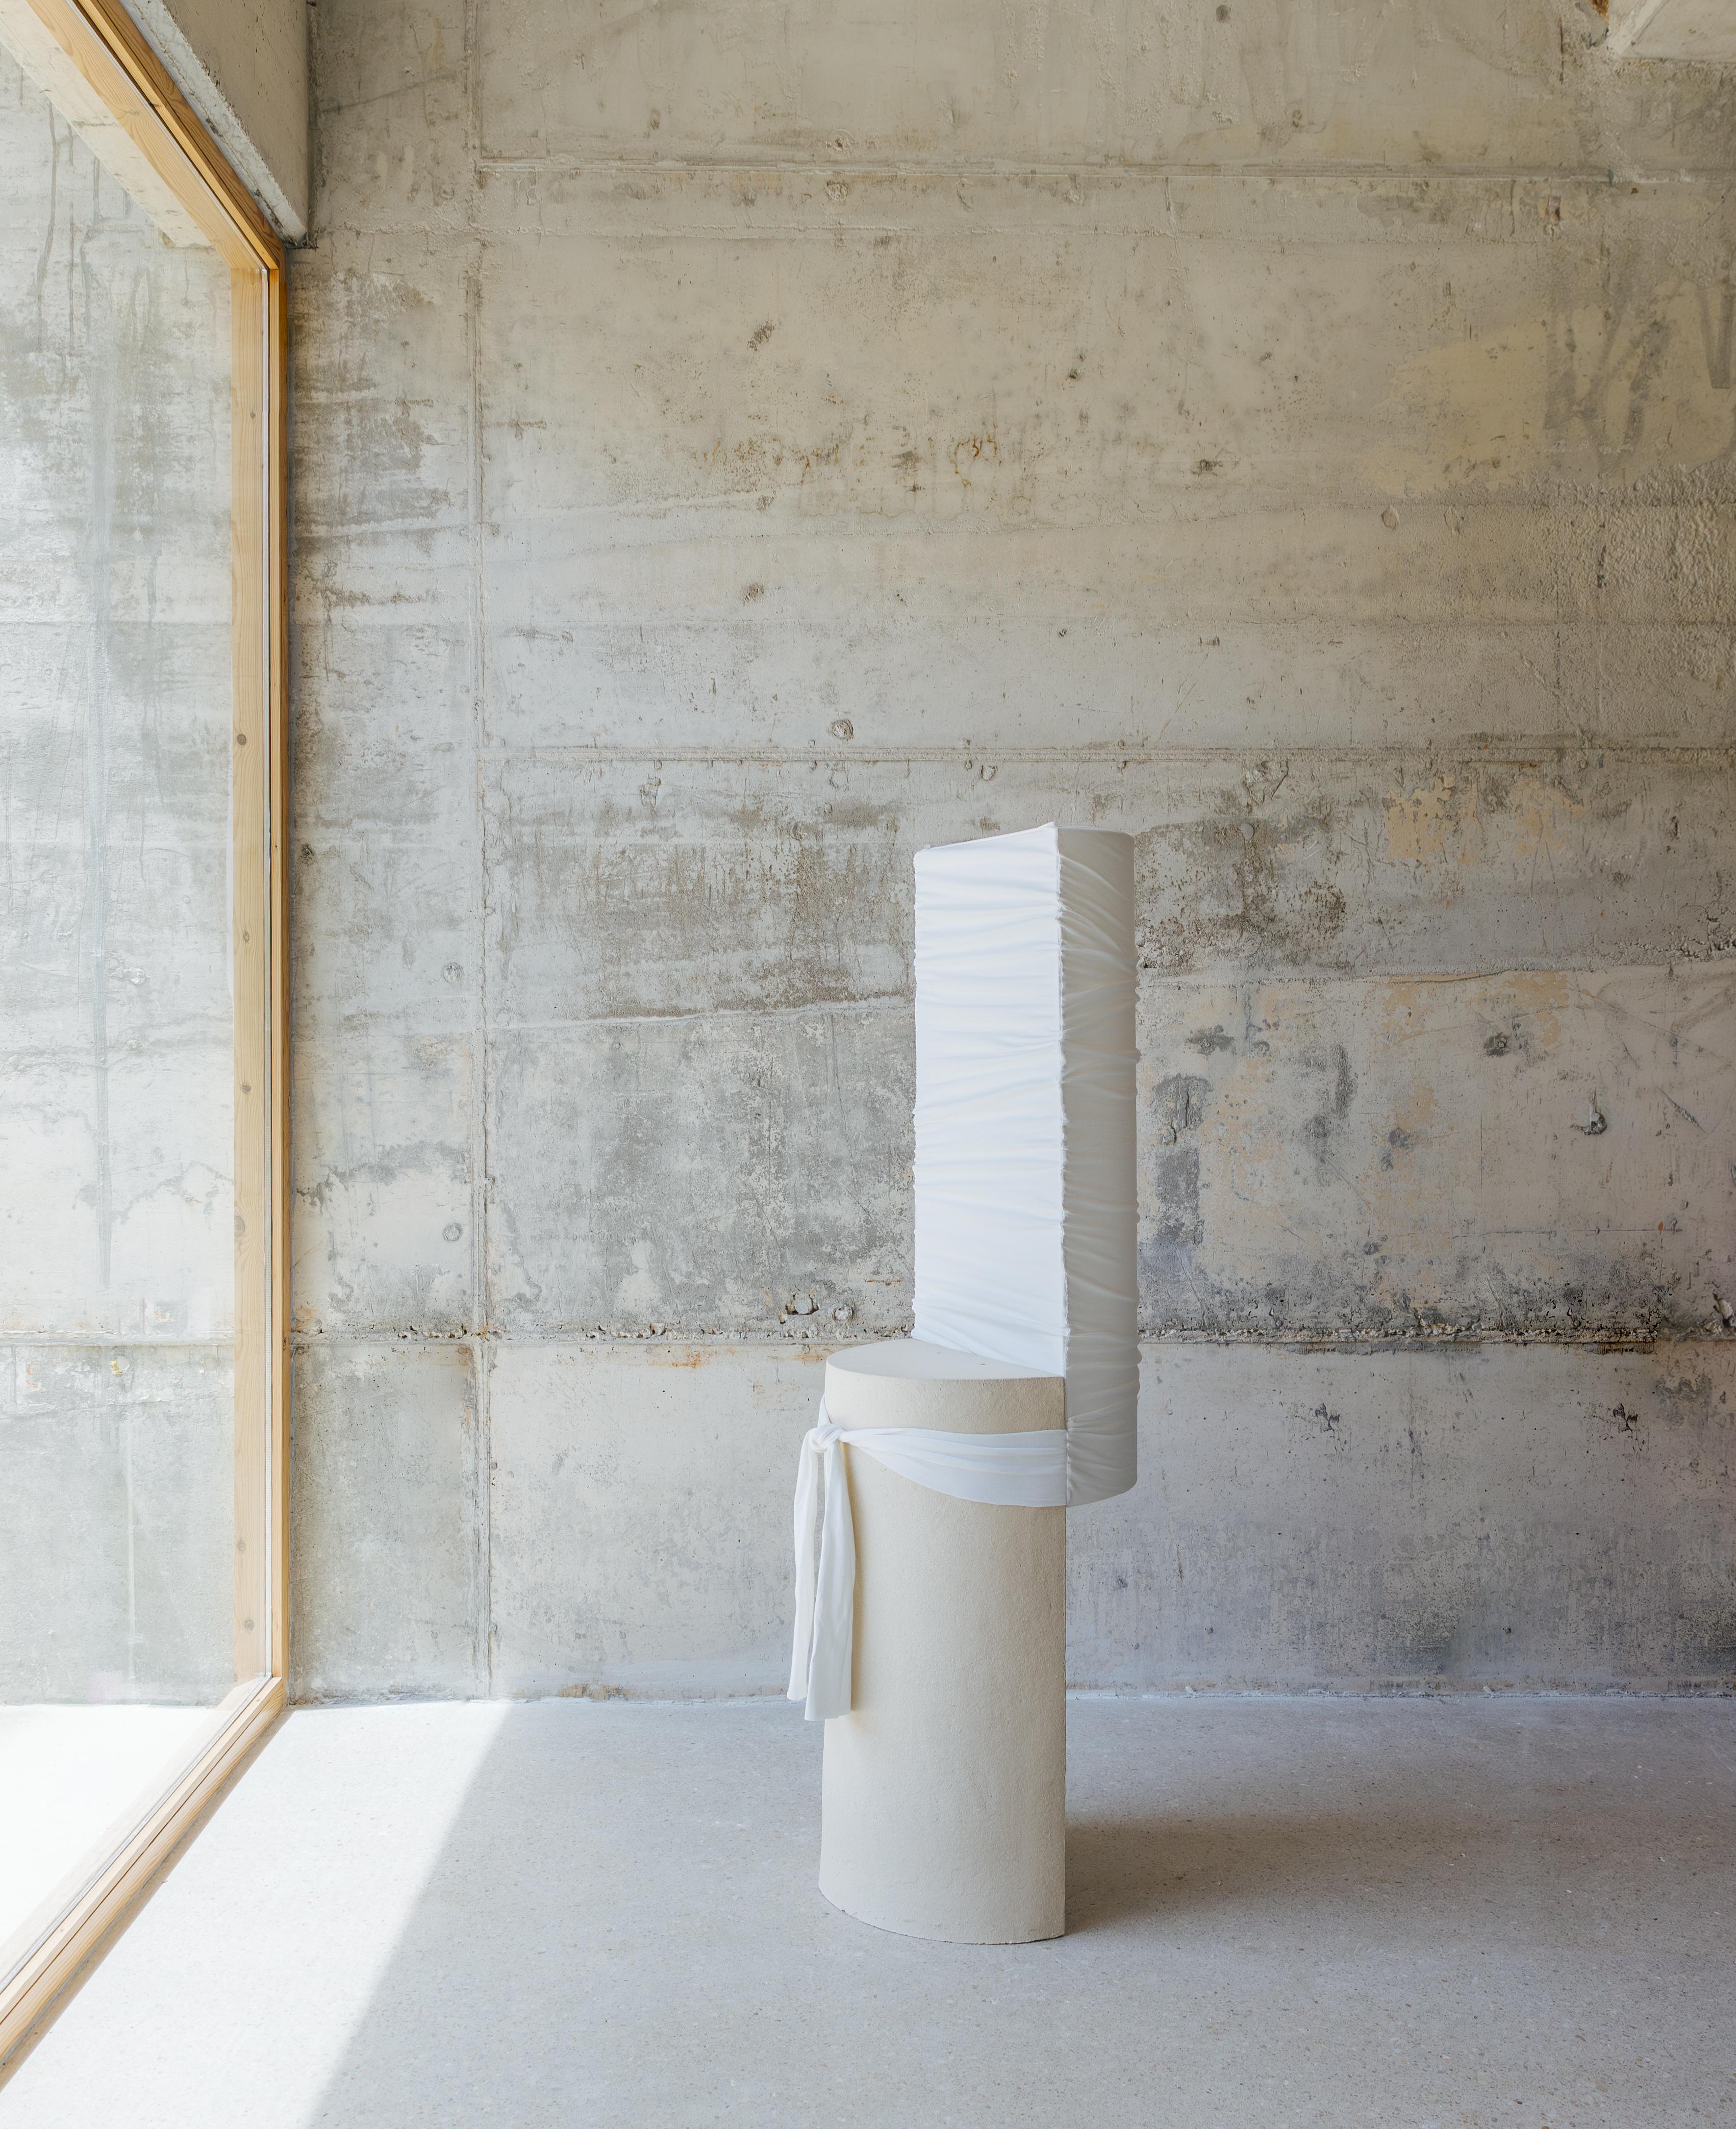 Ark Floor Light L by Lisa Allegra
Dimensions: W 40 x D 40 x H 140 cm.
Materials: Ceramic piece with cotton covered lampshade.

All our lamps can be wired according to each country. If sold to the USA it will be wired for the USA for instance. Please